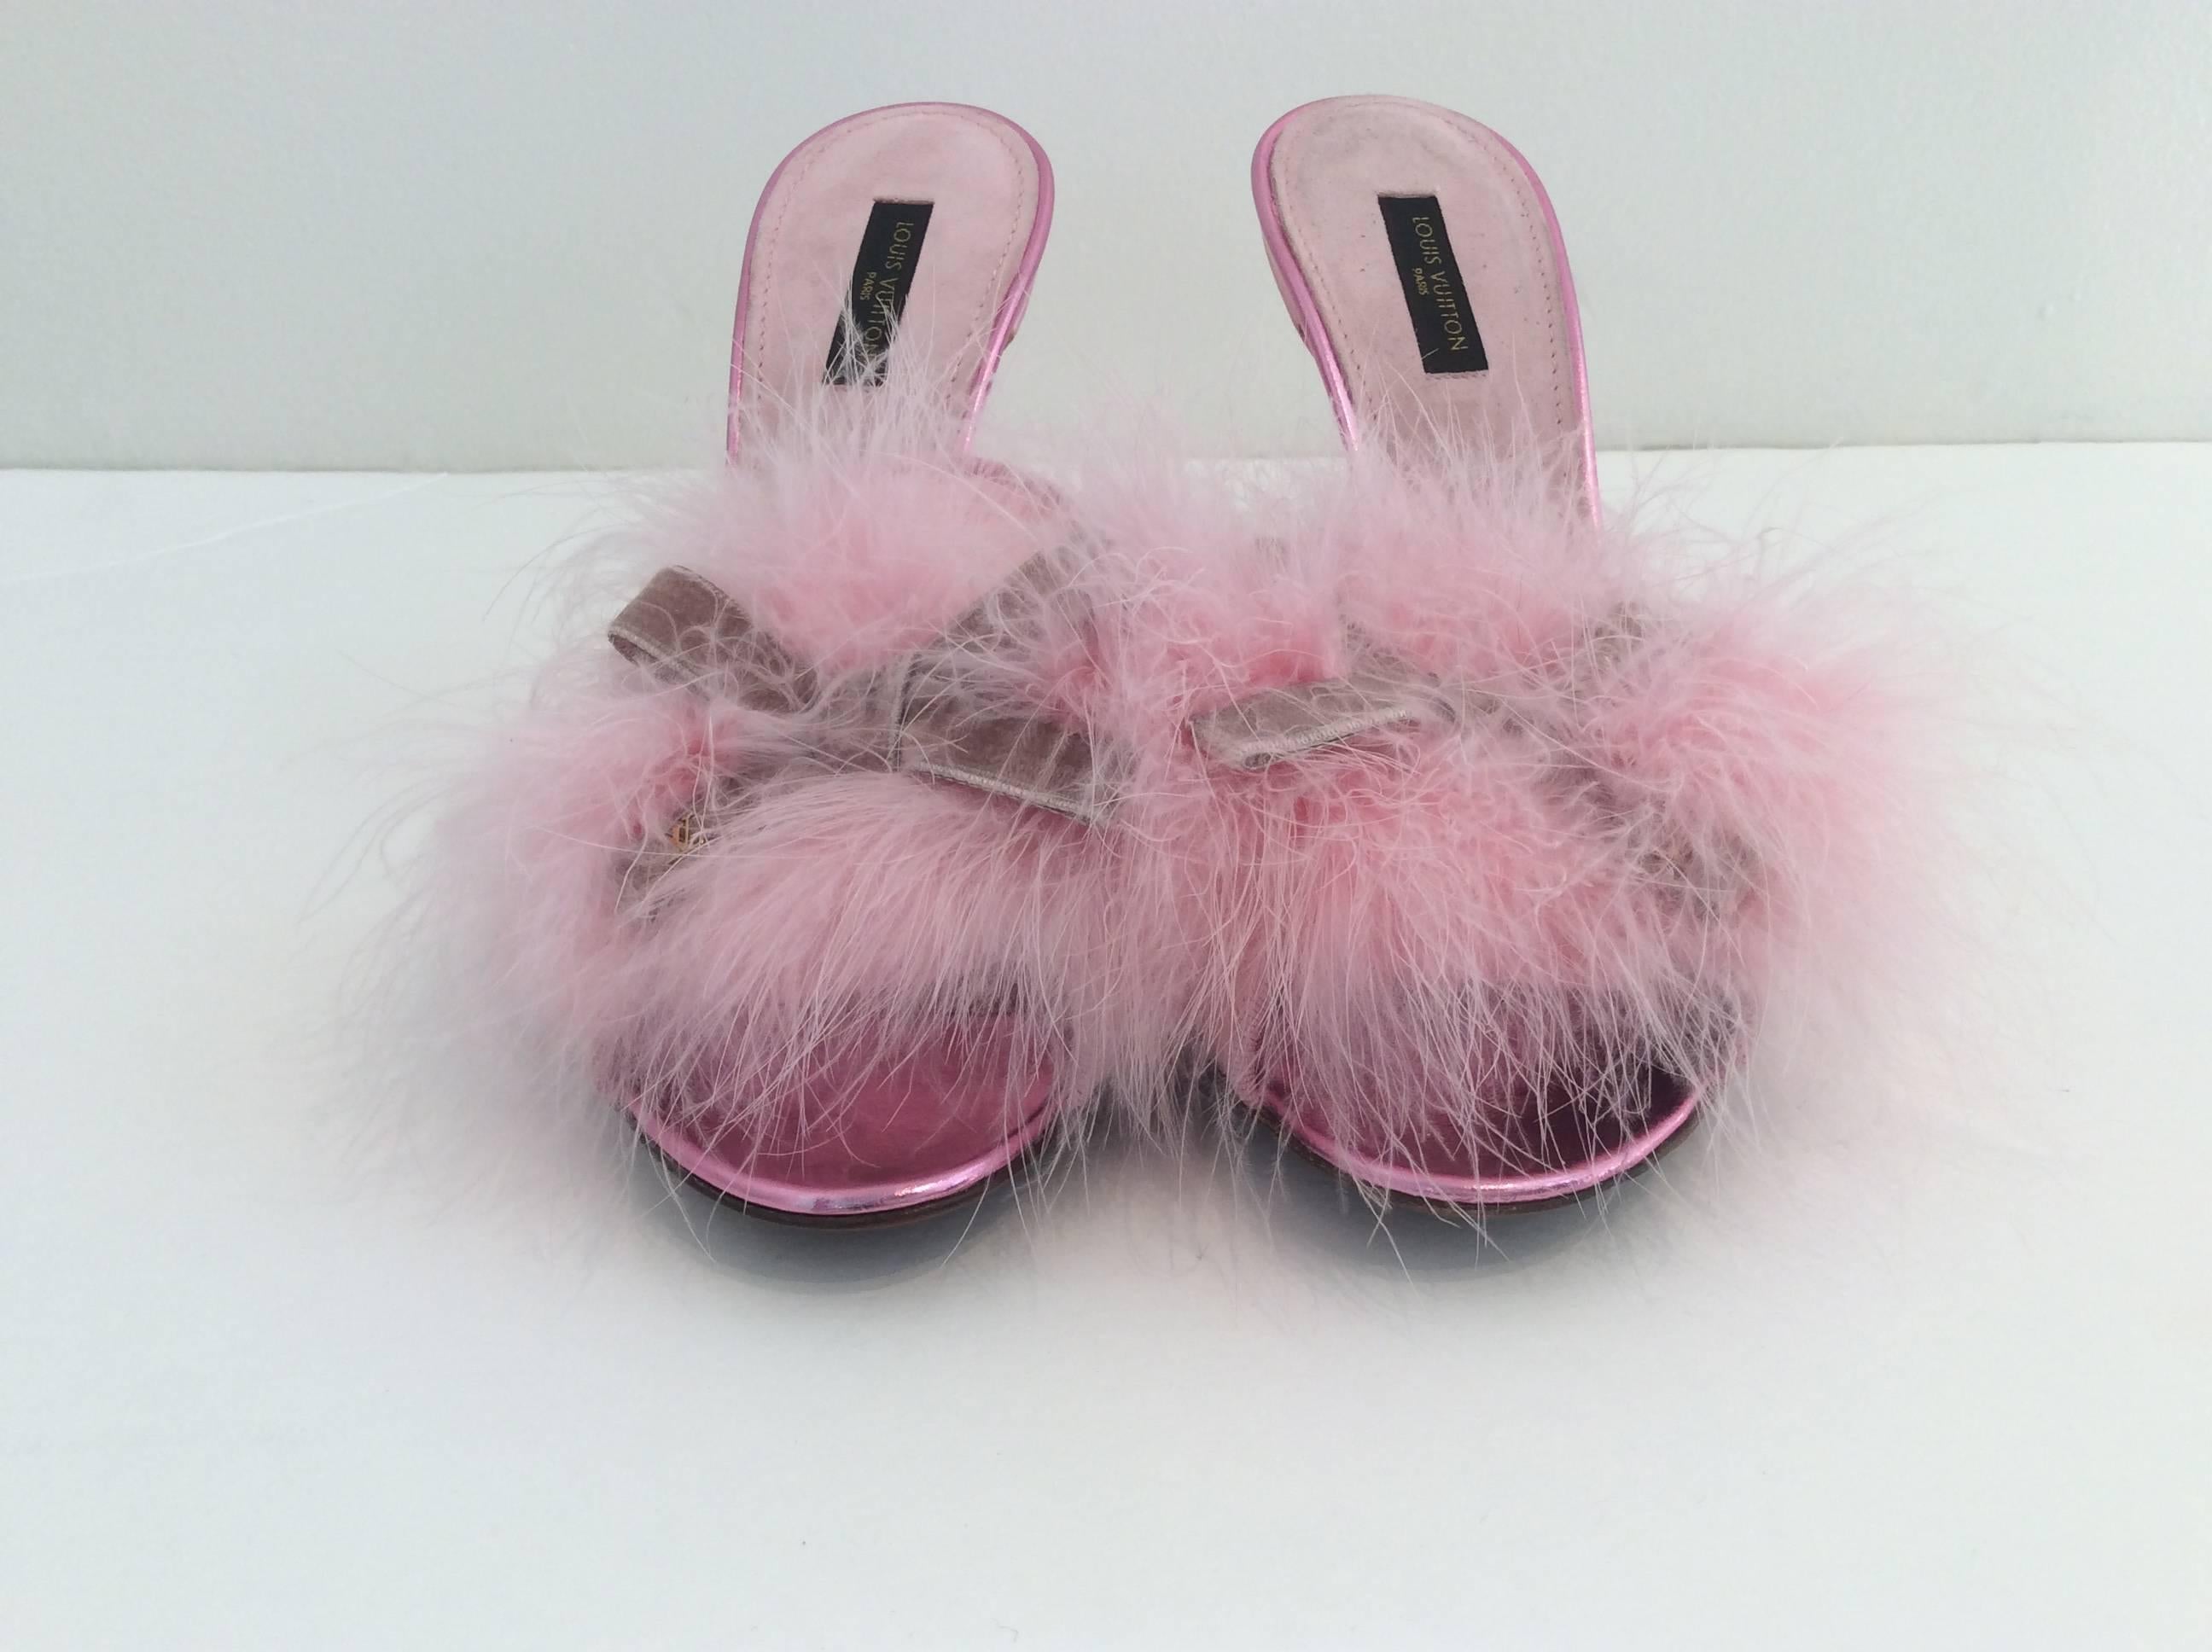 Elegant yet still playful pink satin mules trimmed with grosgrain. The soft gathering of feathers is held down by a single mauve velvet bow in the middle. The heel is 4.5 inches, with the lower 1.5 inches wrapped in gold leather detailing. 

(Please